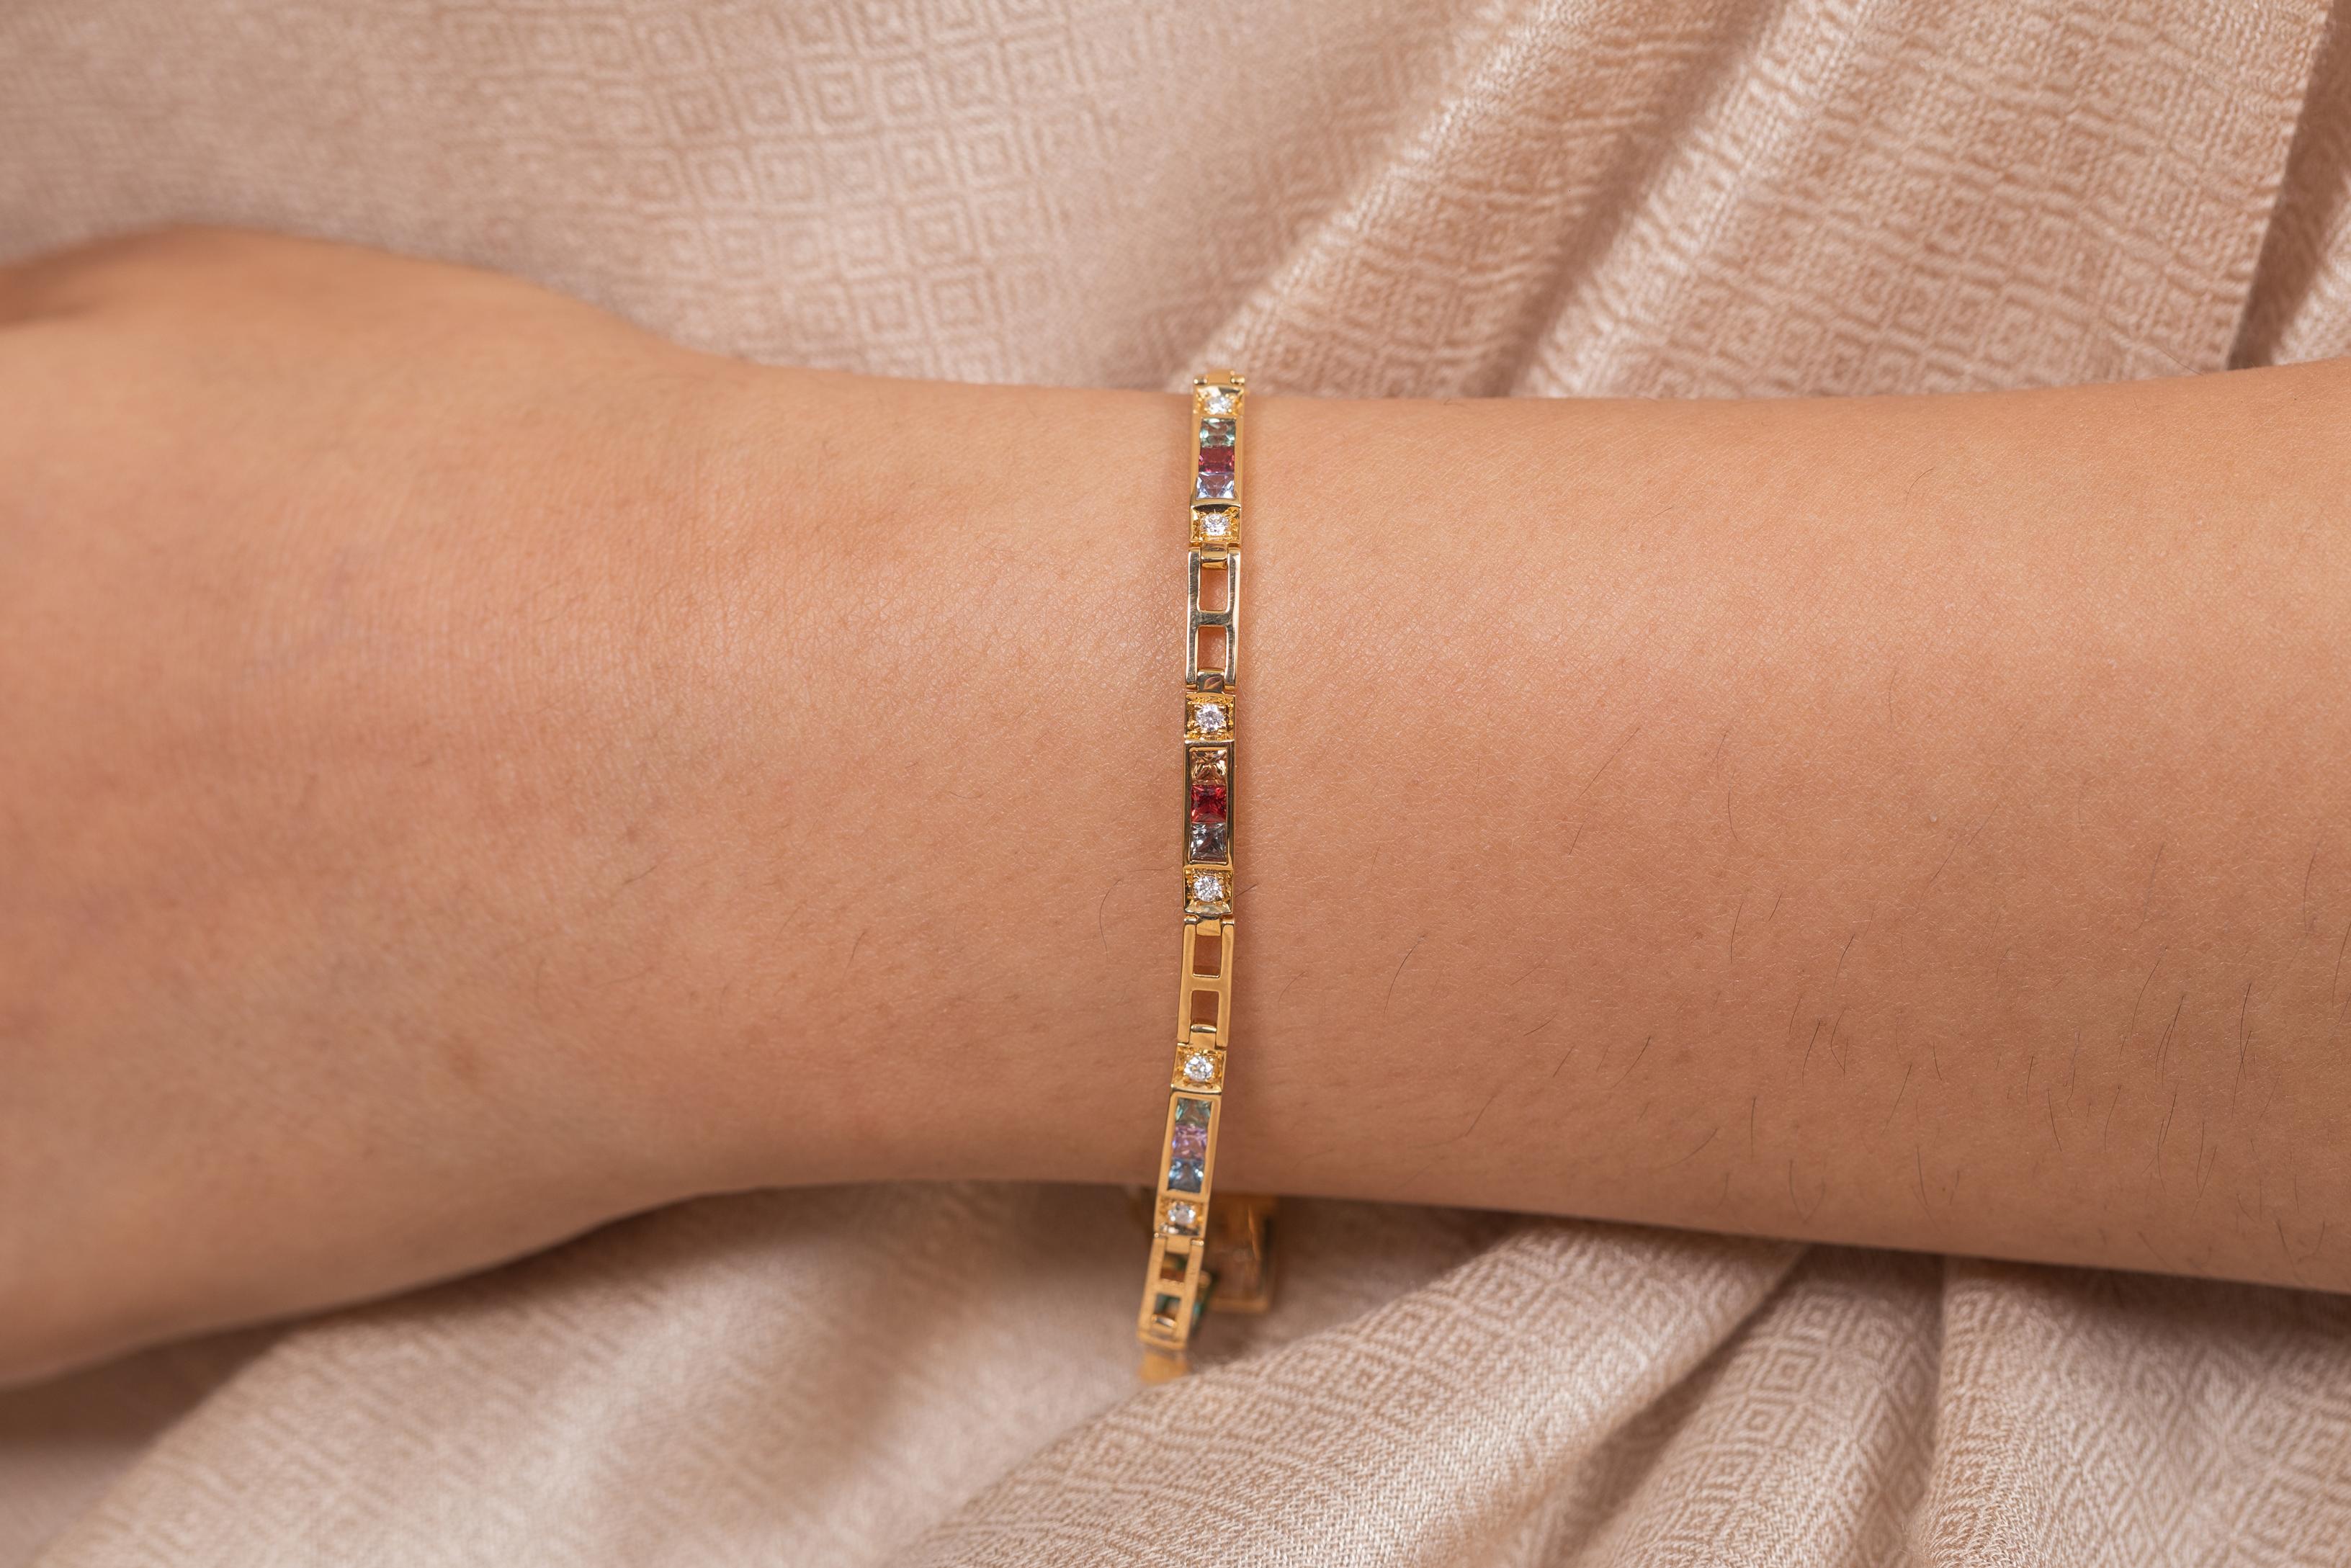 The wearing of charms may have begun as a form of amulet or talisman to ward off evil spirits or bad luck.
This multi sapphire bracelet has a square cut gemstone and diamonds in 18K Gold. A perfect piece of jewelry to adorn your jewelry